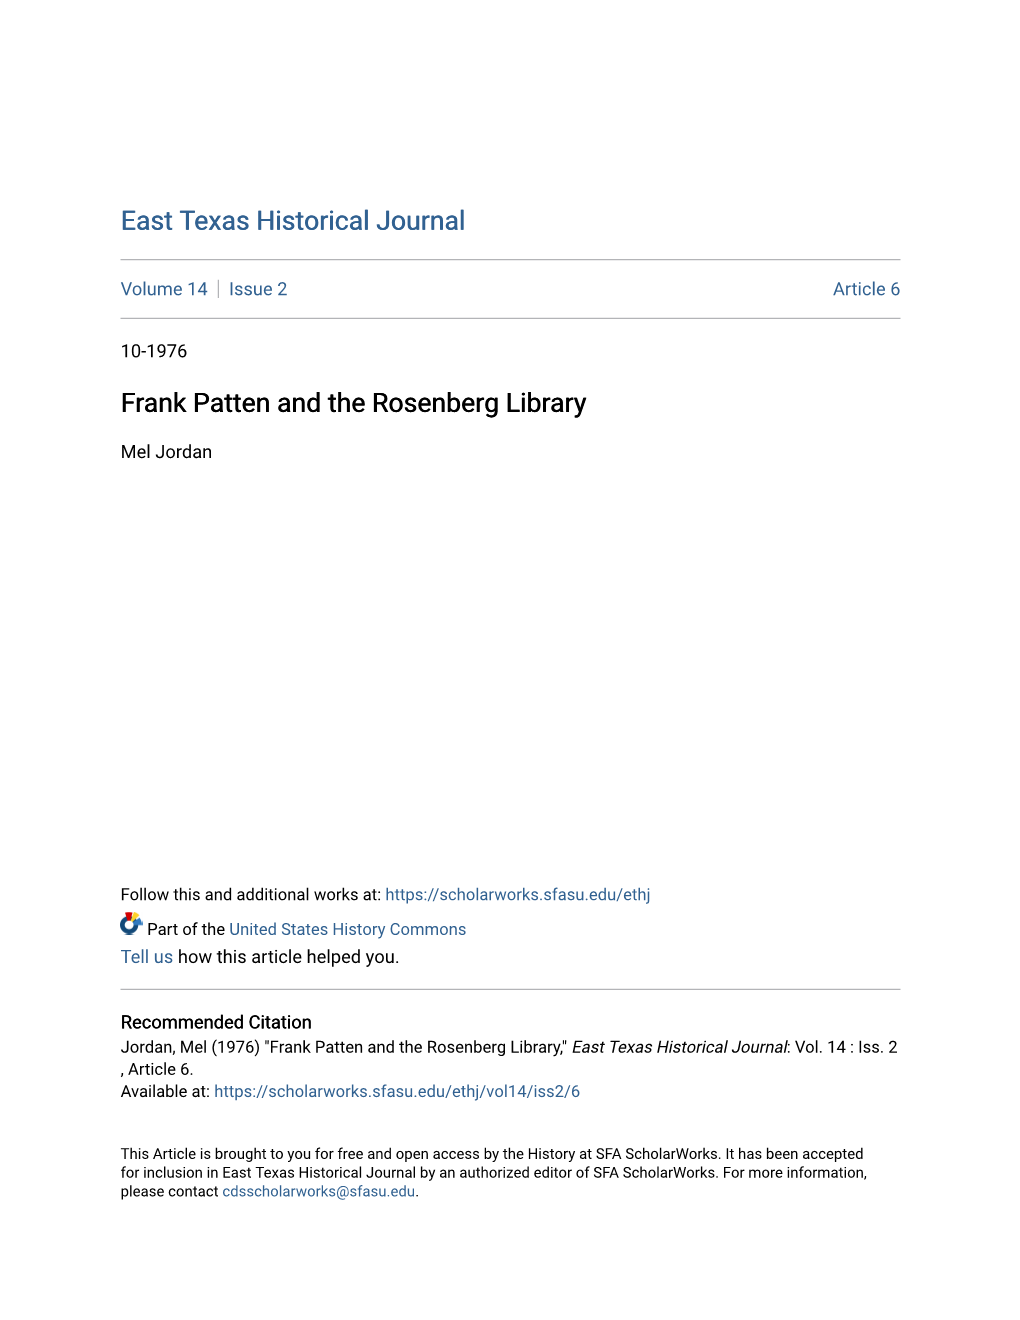 Frank Patten and the Rosenberg Library